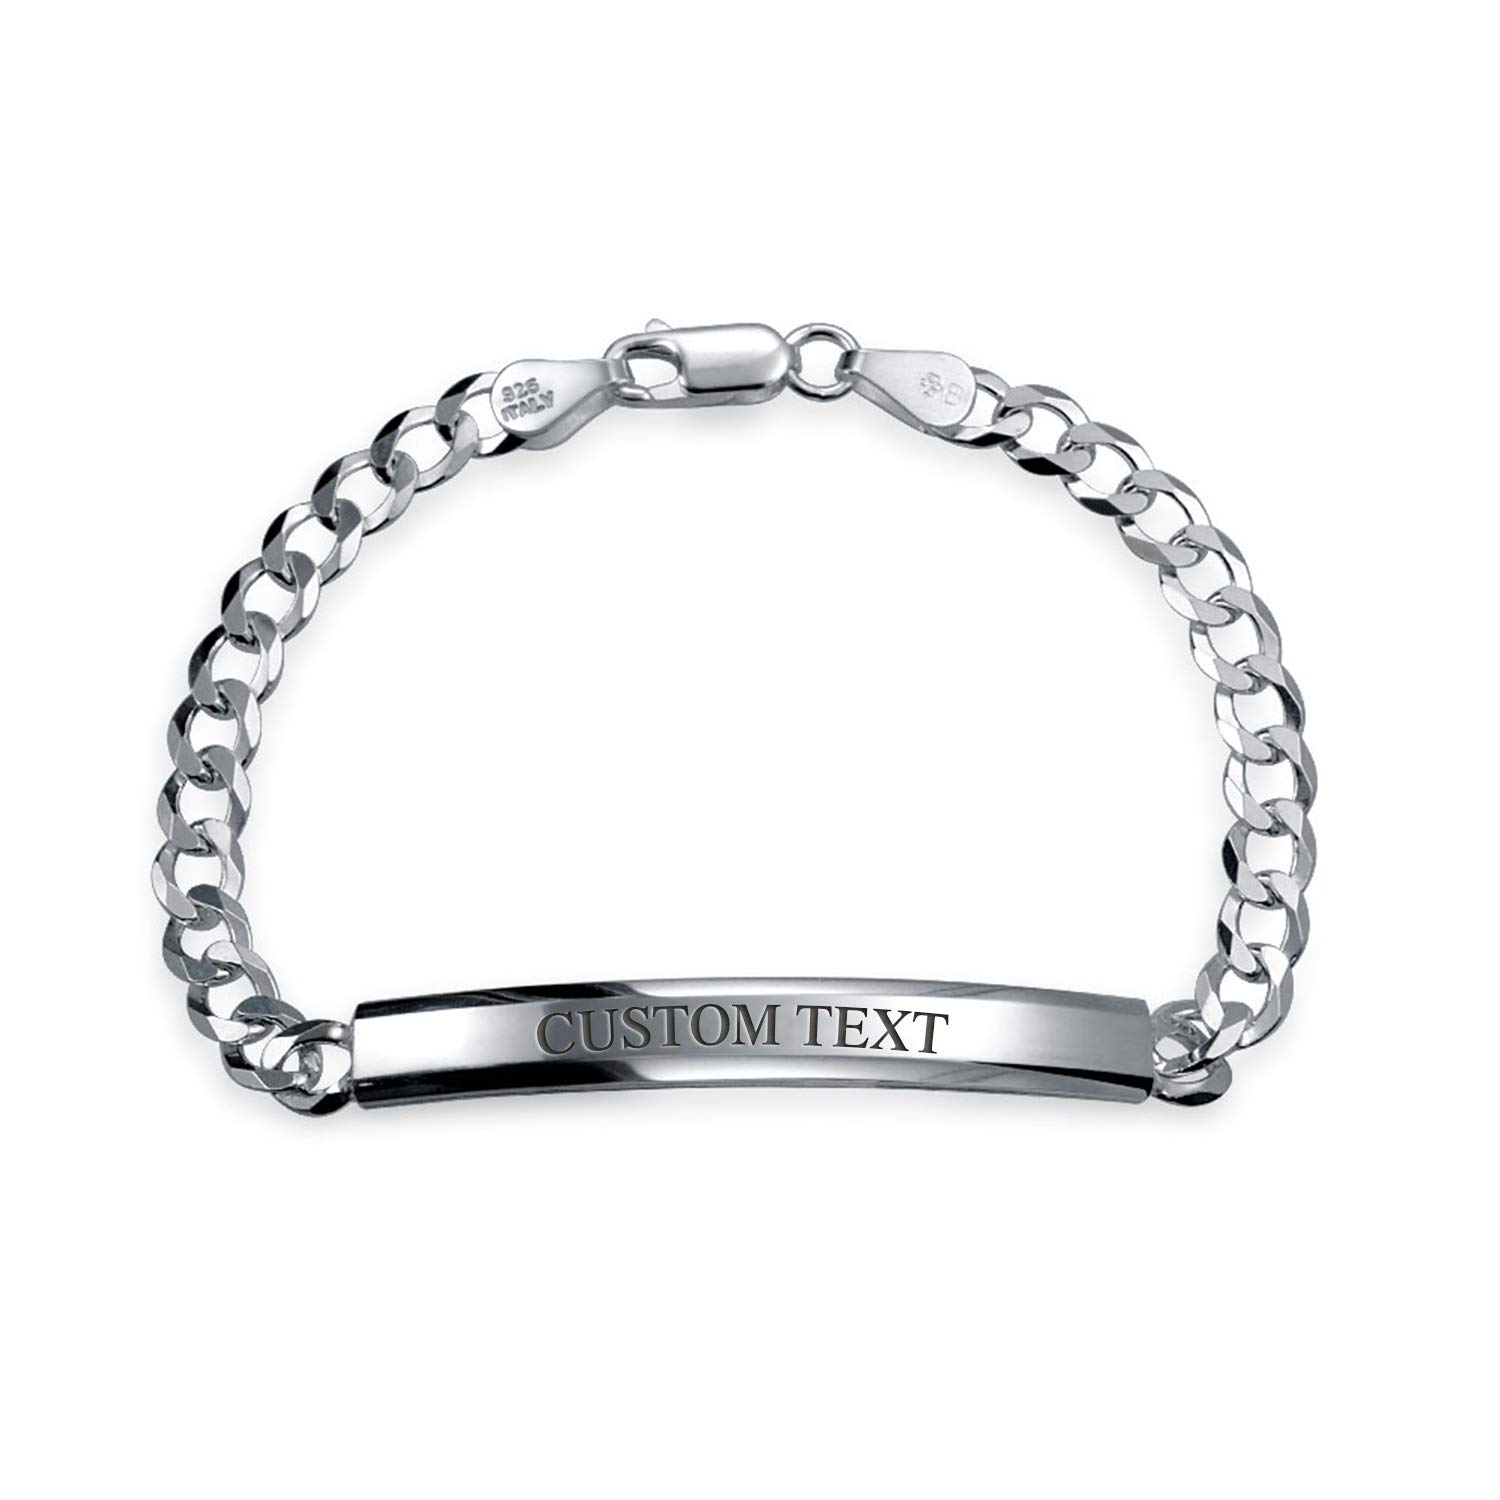 Bling Jewelry Personalize Bar Name Plated identification ID Bracelet For Men with Mariner, Curb, Figaro, Link Chain .925 Sterling Silver Made In Italy 7,8,8.5,9 Inch Customizable